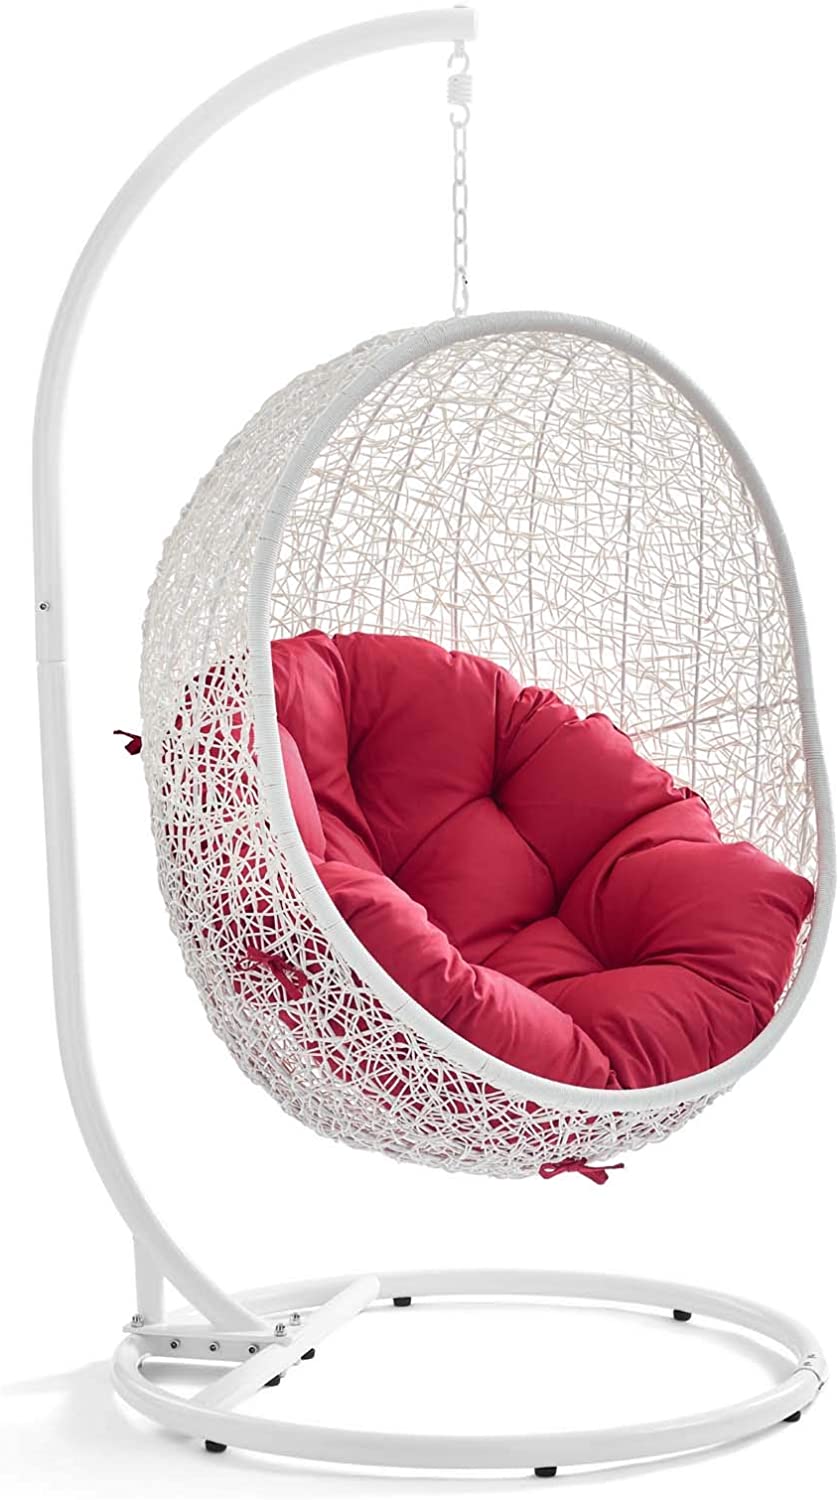 Modway EEI-2273-WHI-RED Hide Wicker Rattan Outdoor Patio Porch Lounge Egg Set